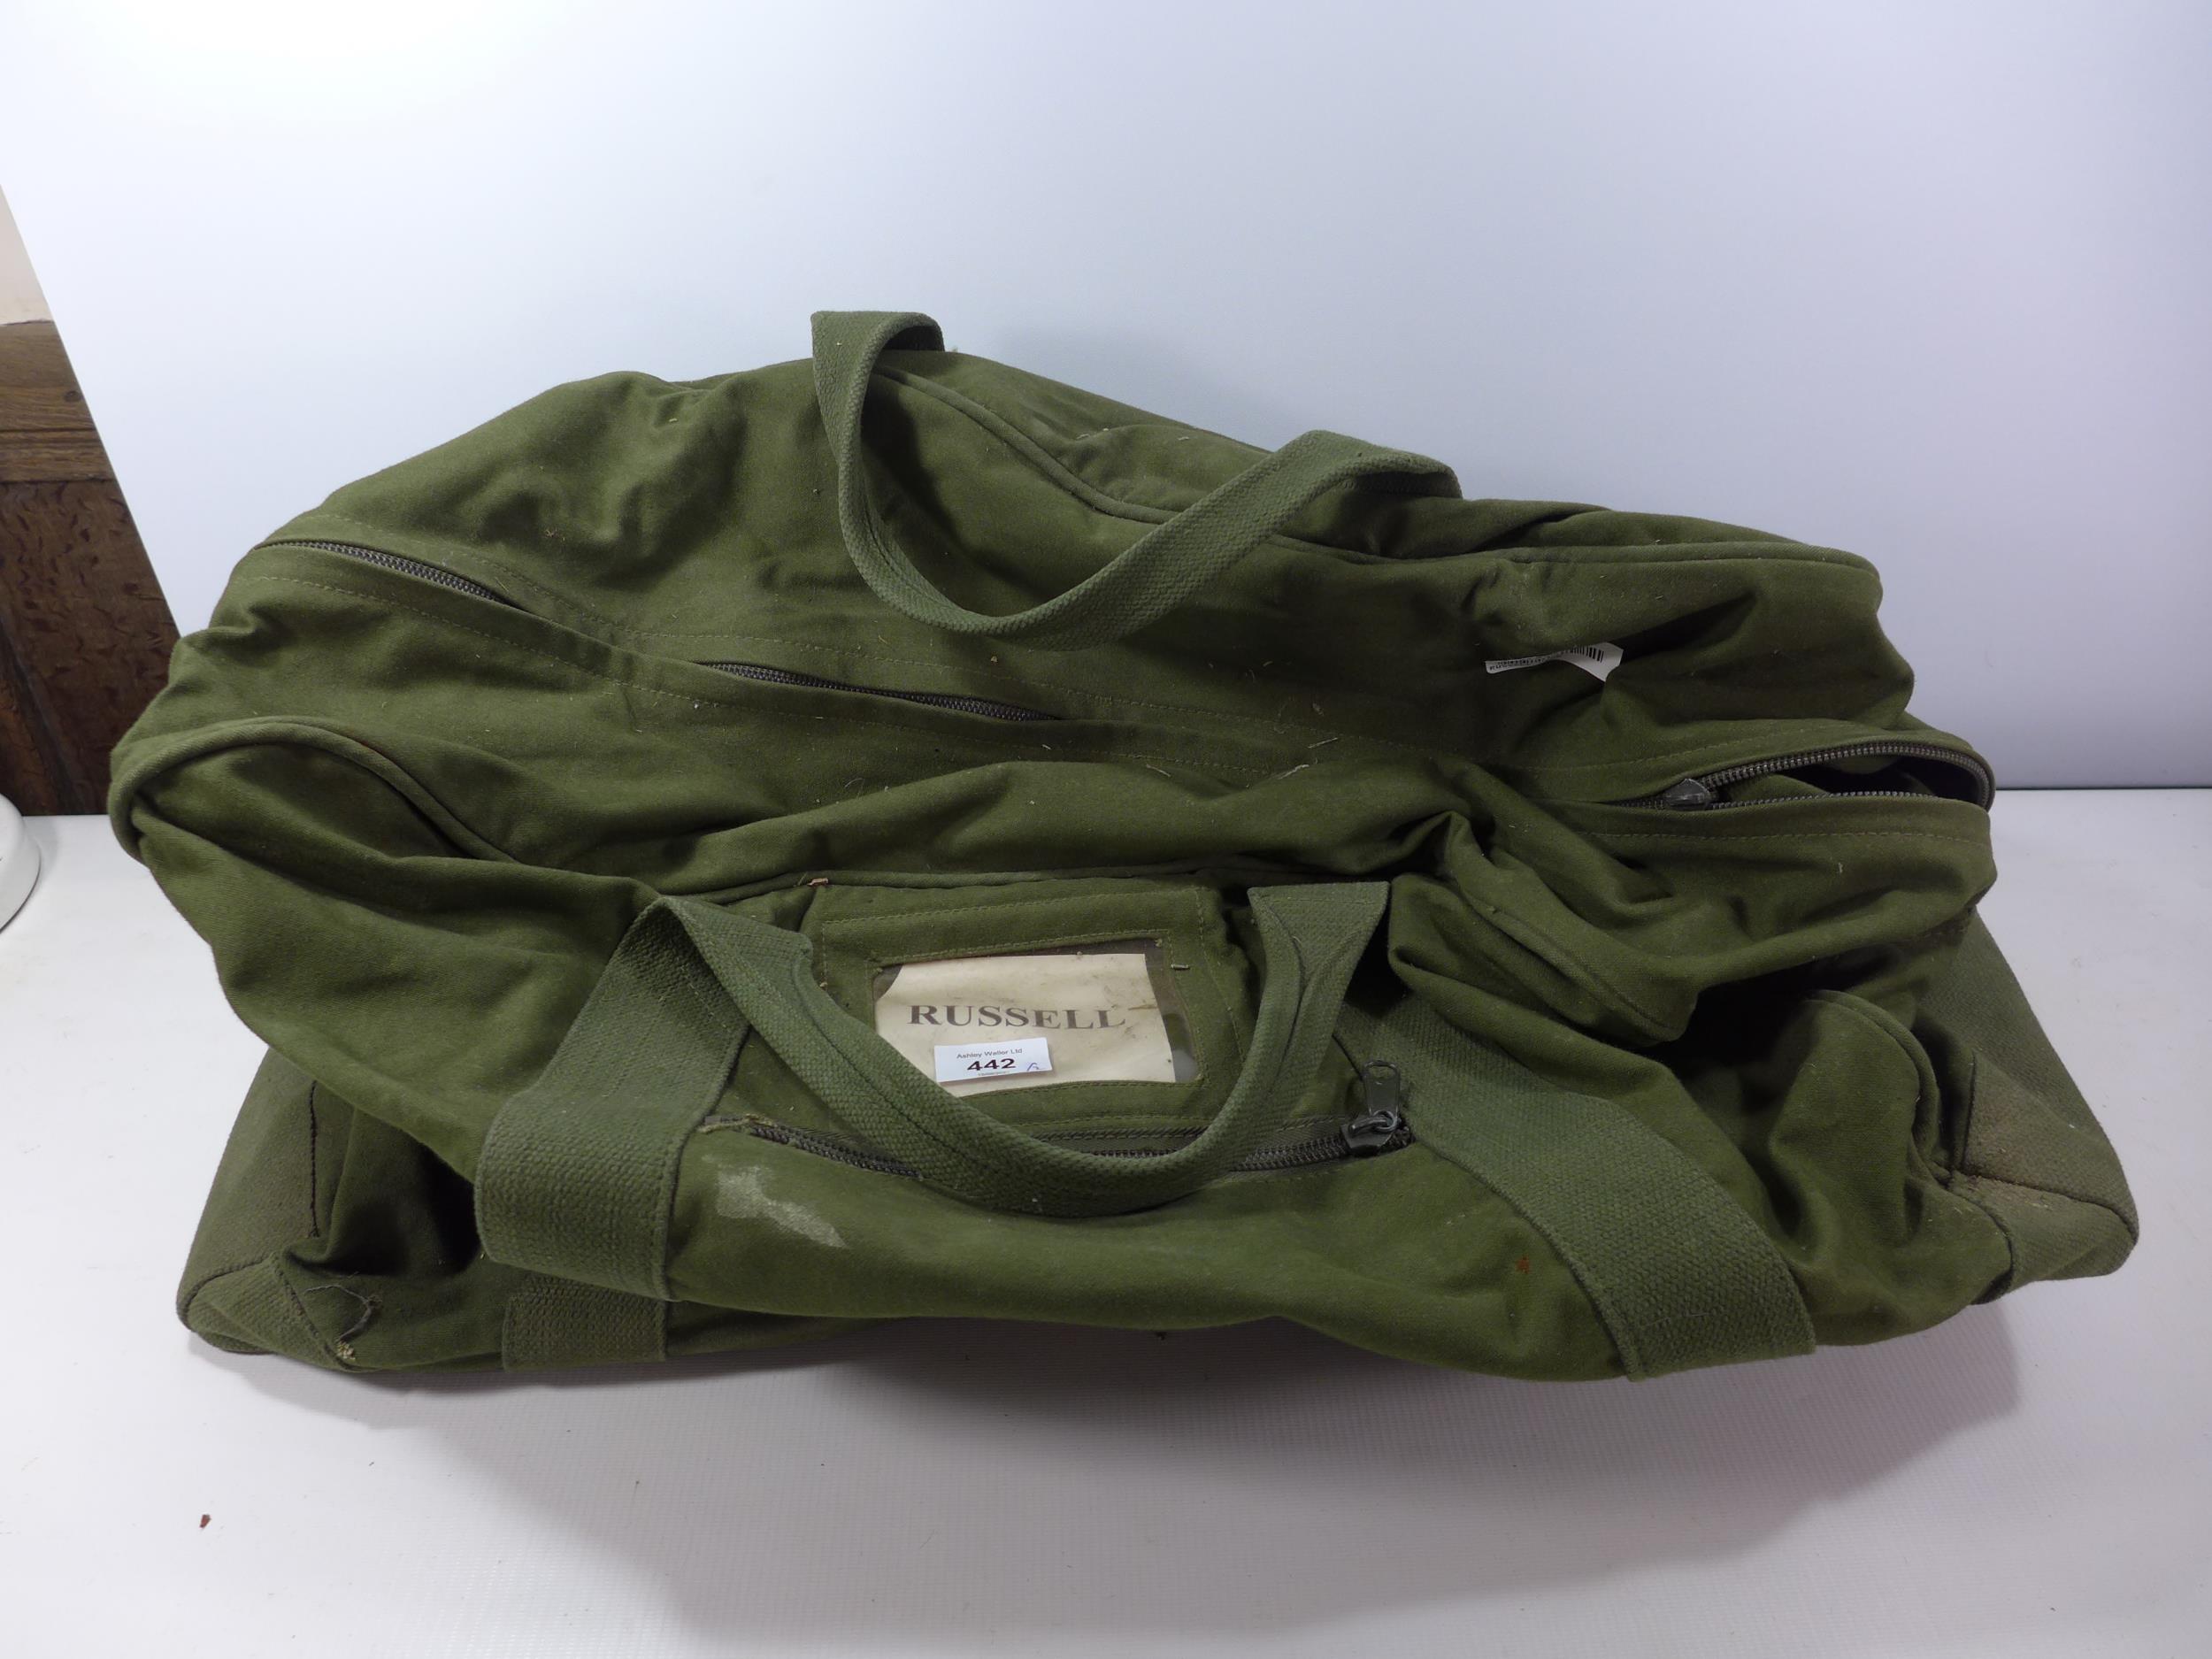 TWO GREEN KIT BAGS WITH RUSSELL LABEL